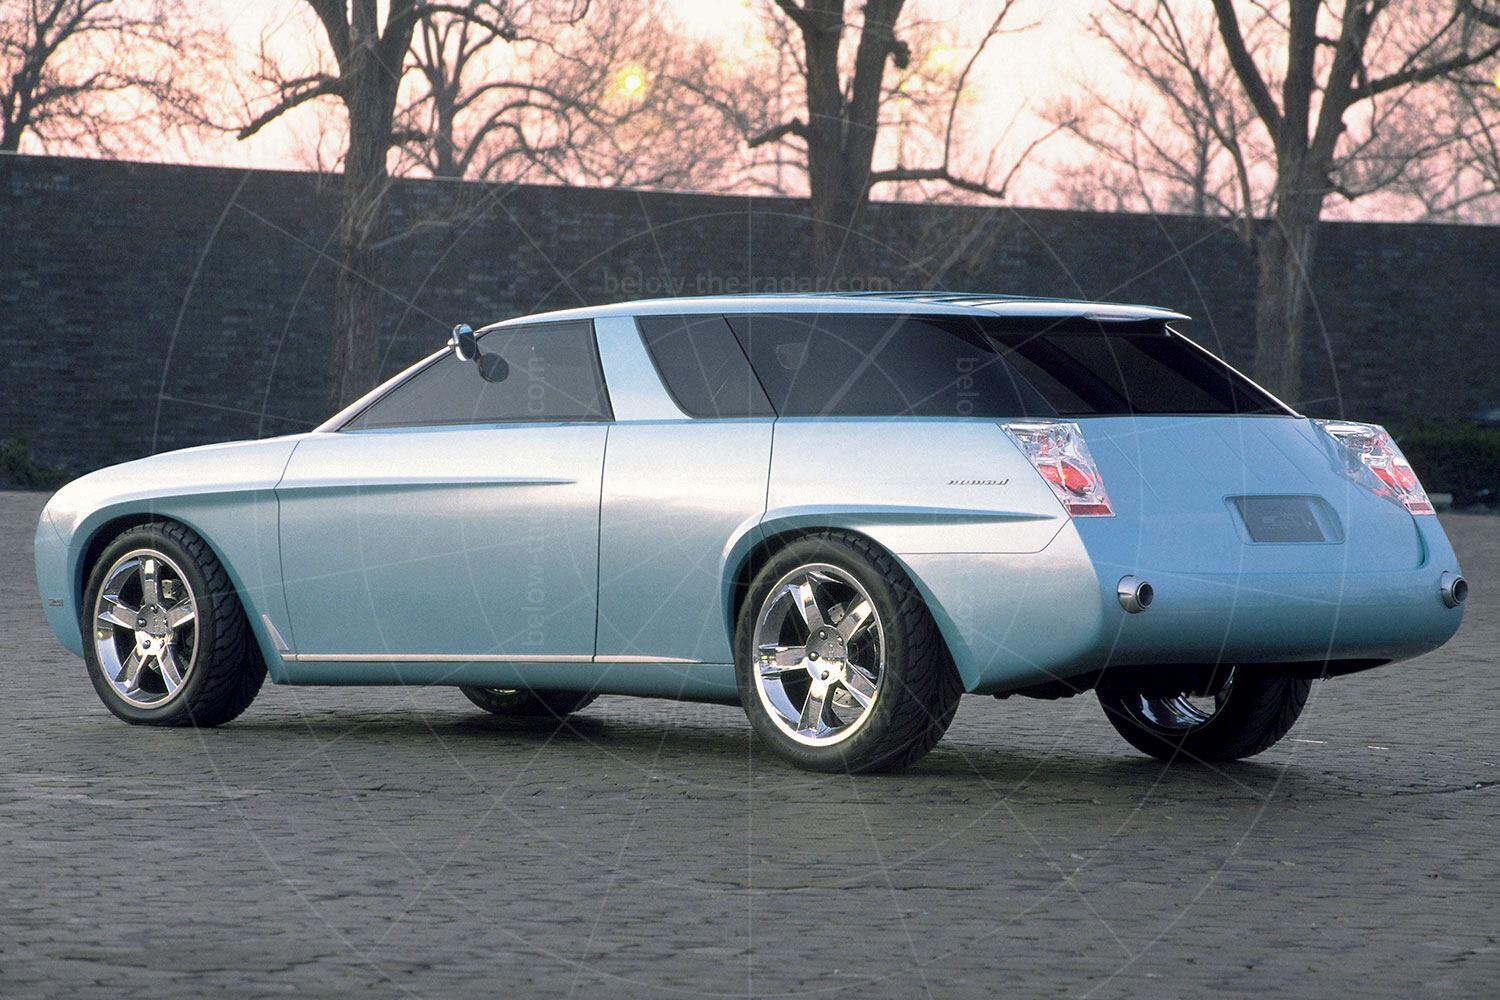 The 1999 Chevrolet Nomad concept Pic: GM | The 1999 Chevrolet Nomad concept